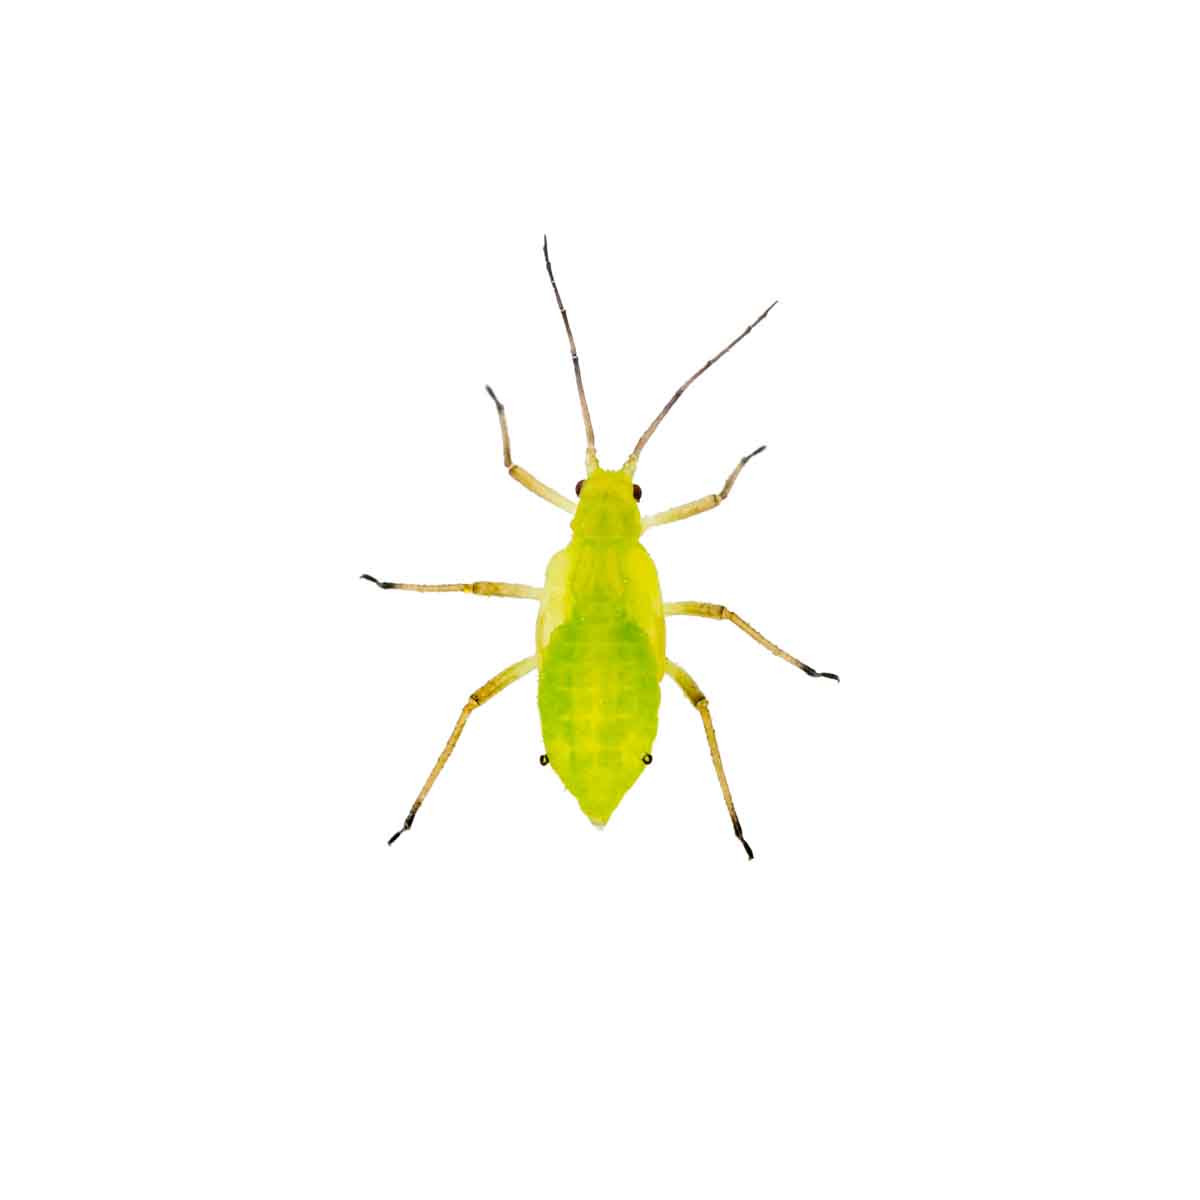 Aphid pest control experts